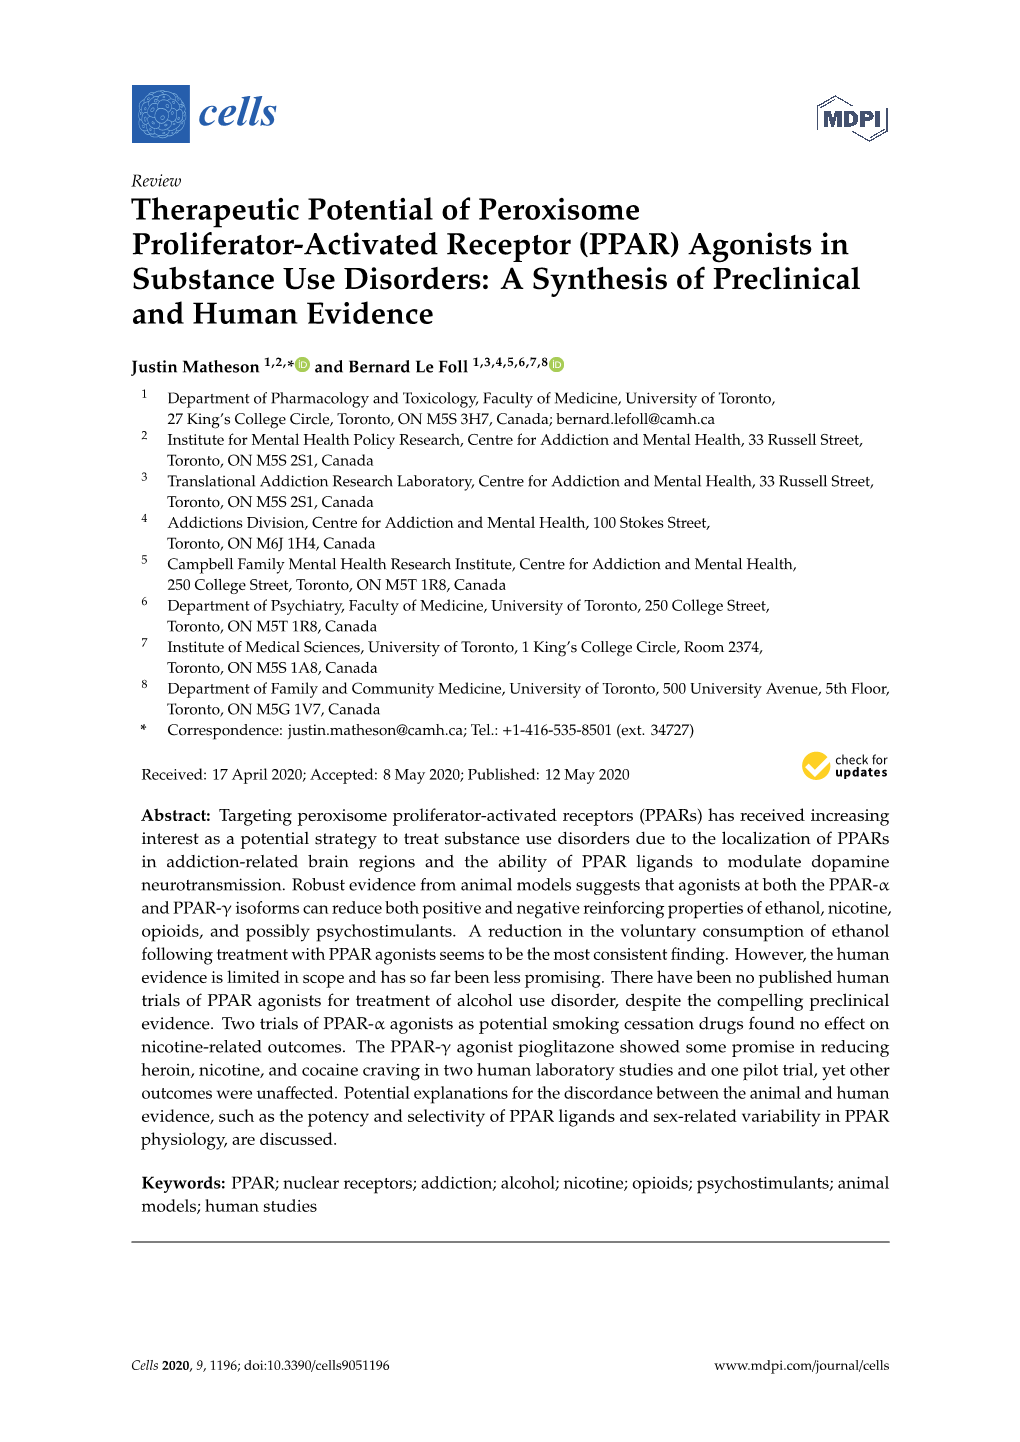 (PPAR) Agonists in Substance Use Disorders: a Synthesis of Preclinical and Human Evidence